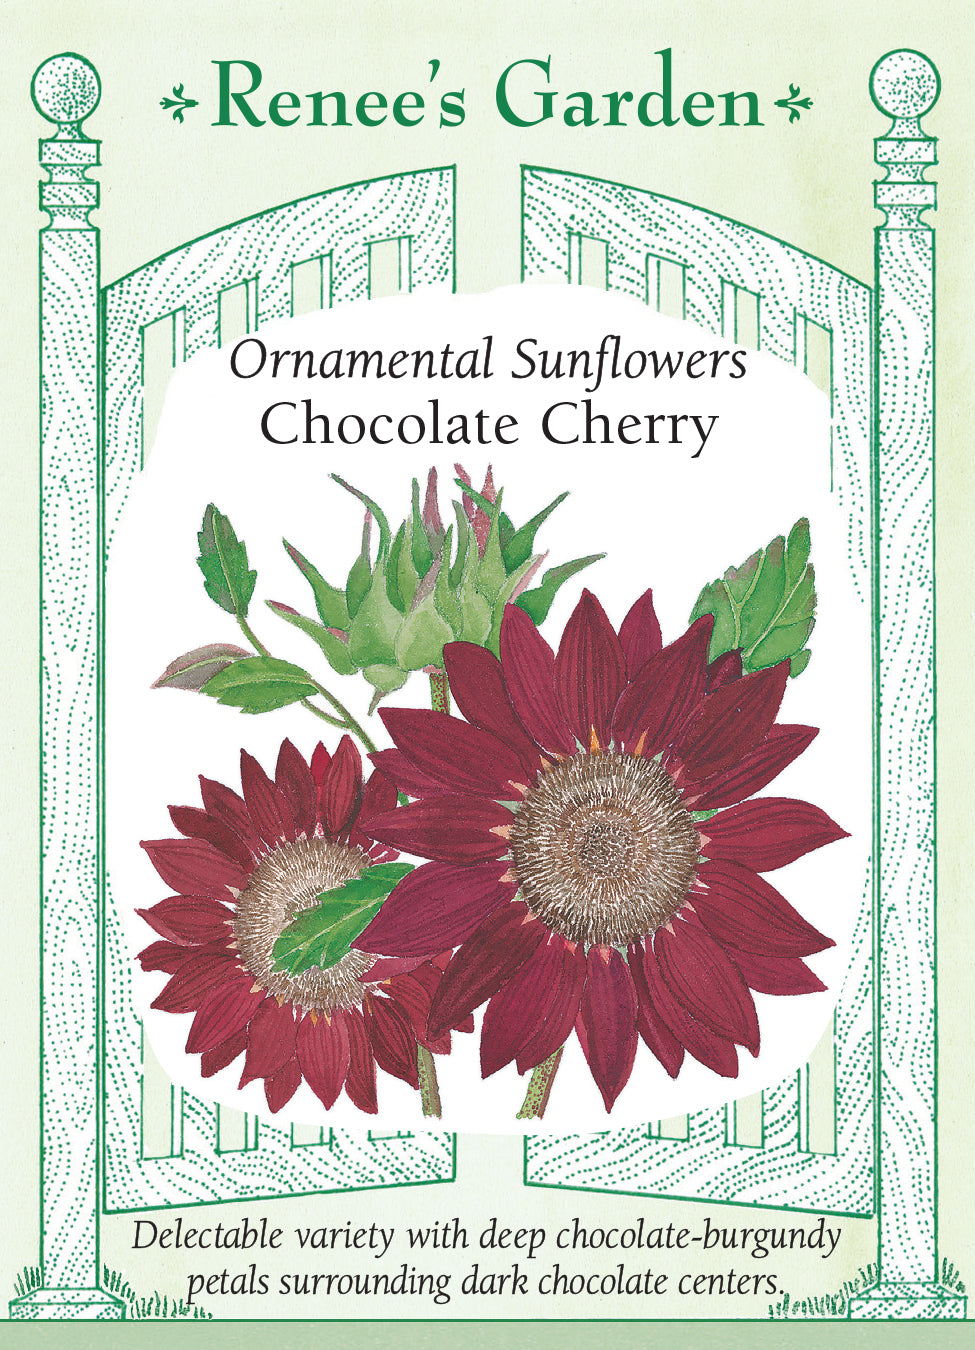 Seed Assortment - Growing Happiness Annual Flower Collection in